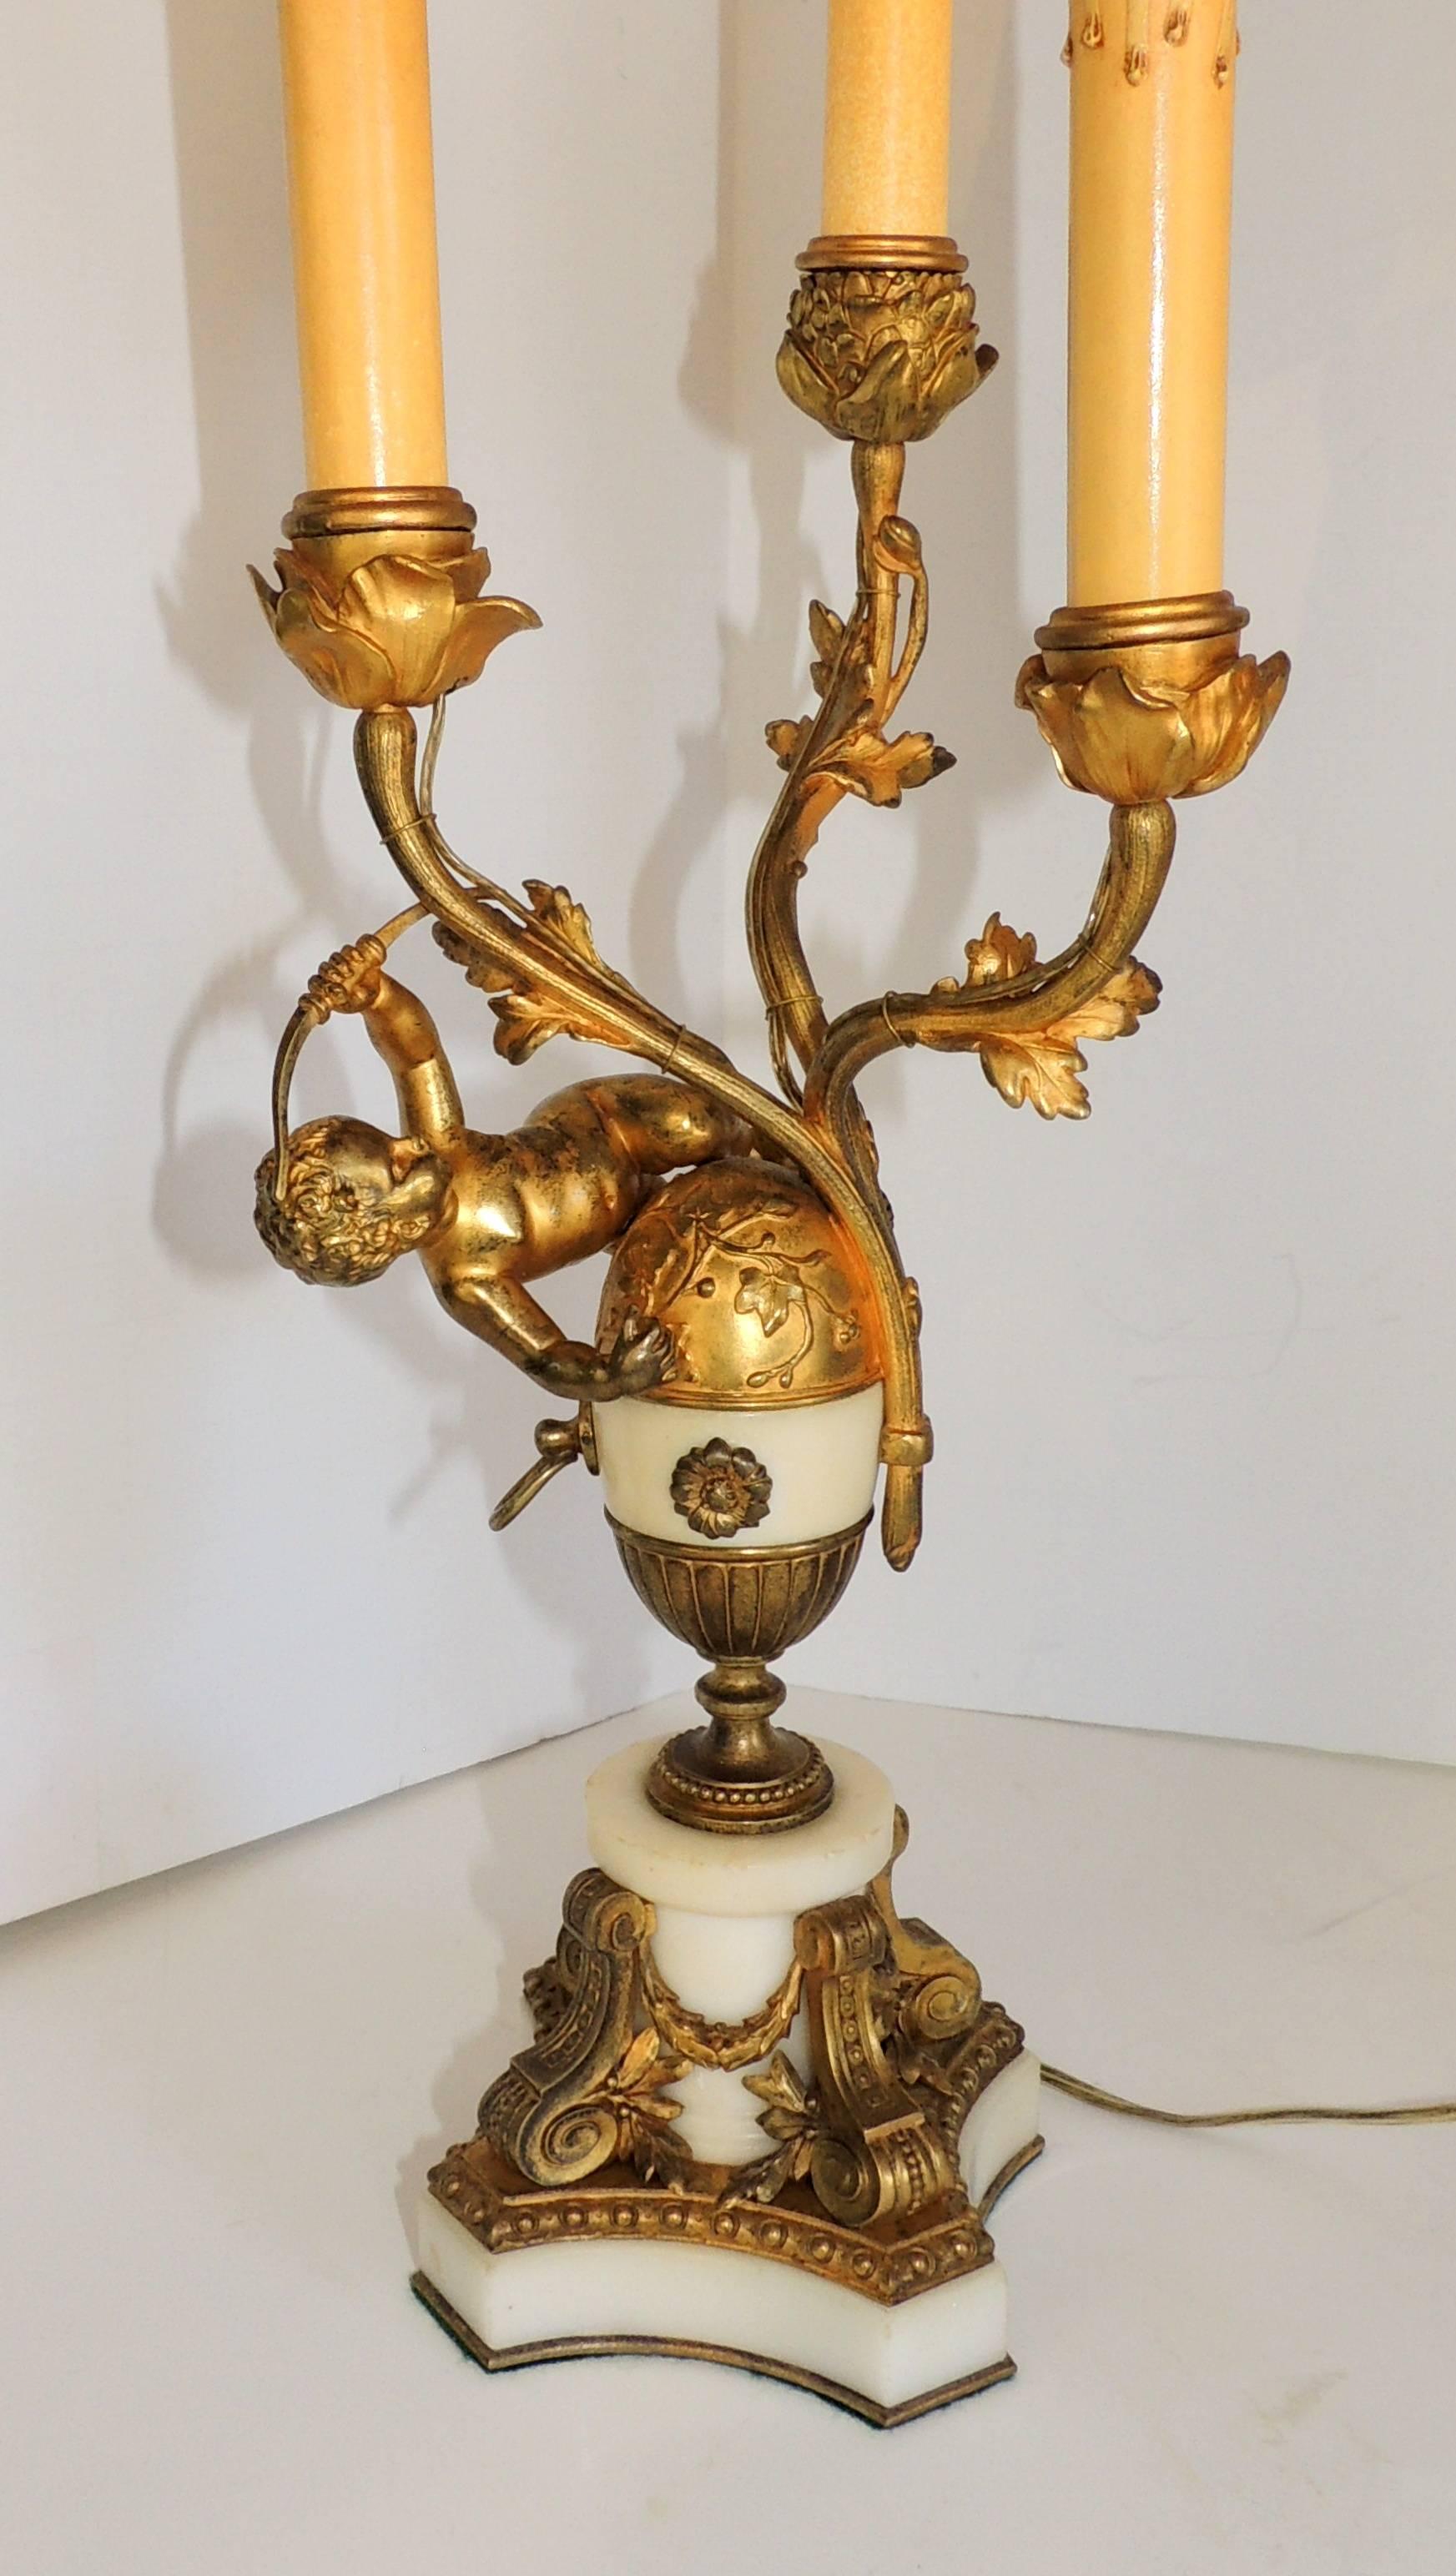 A beautiful pair of French gilt doré bronze and marble cherub ormolu-mounted candelabra / three branch lamps.